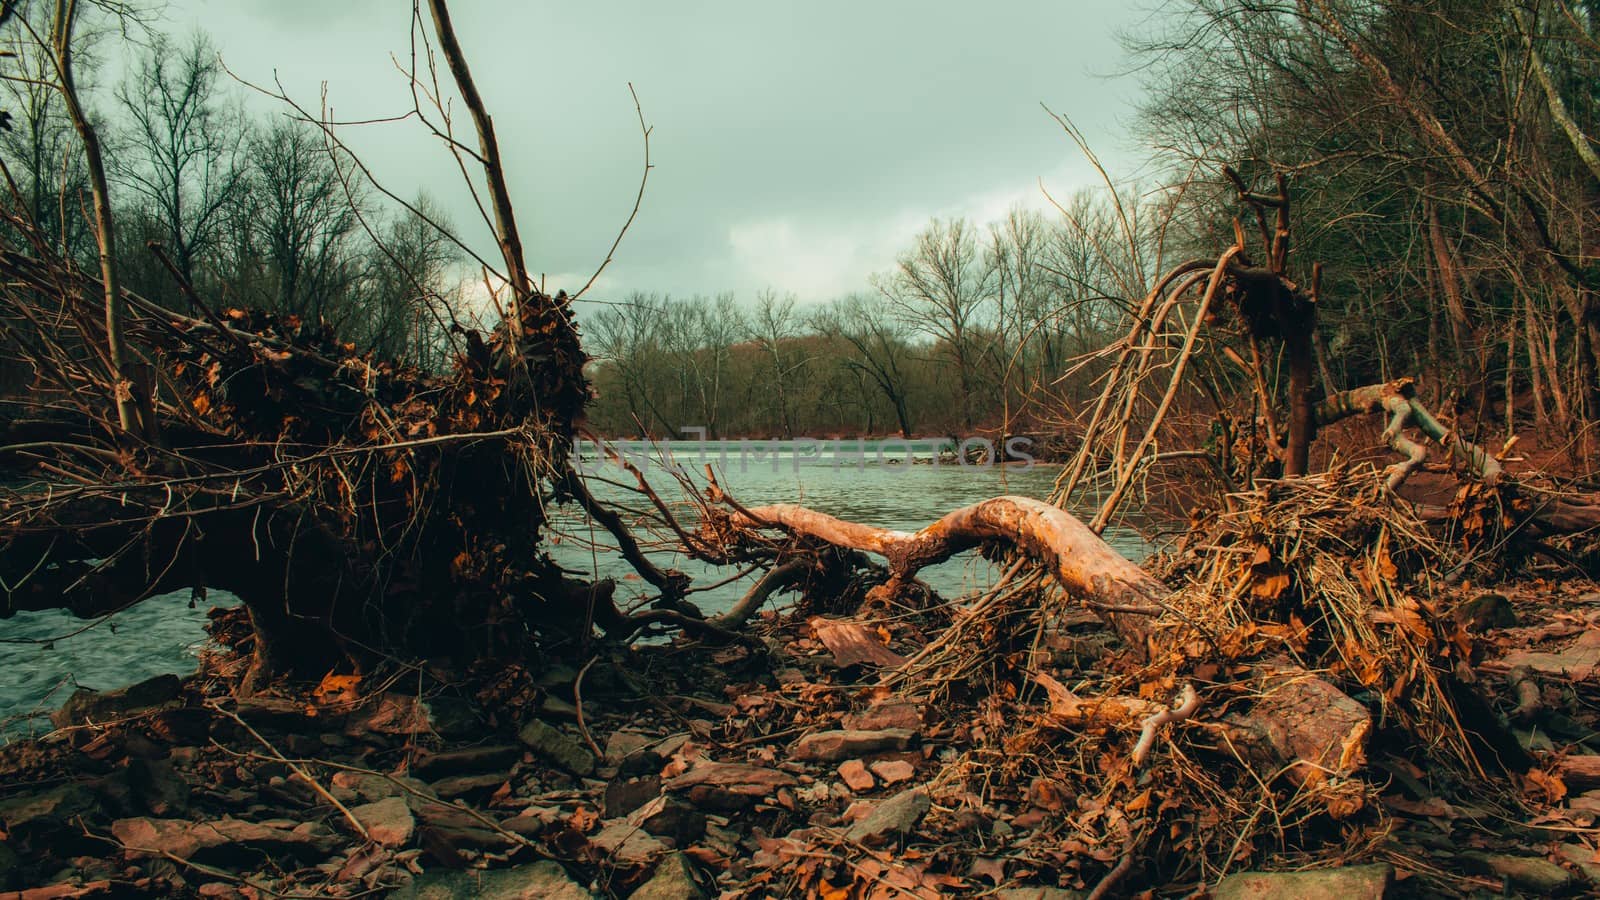 A Fallen Tree Next to a River With a Man-Made Damn in the Background